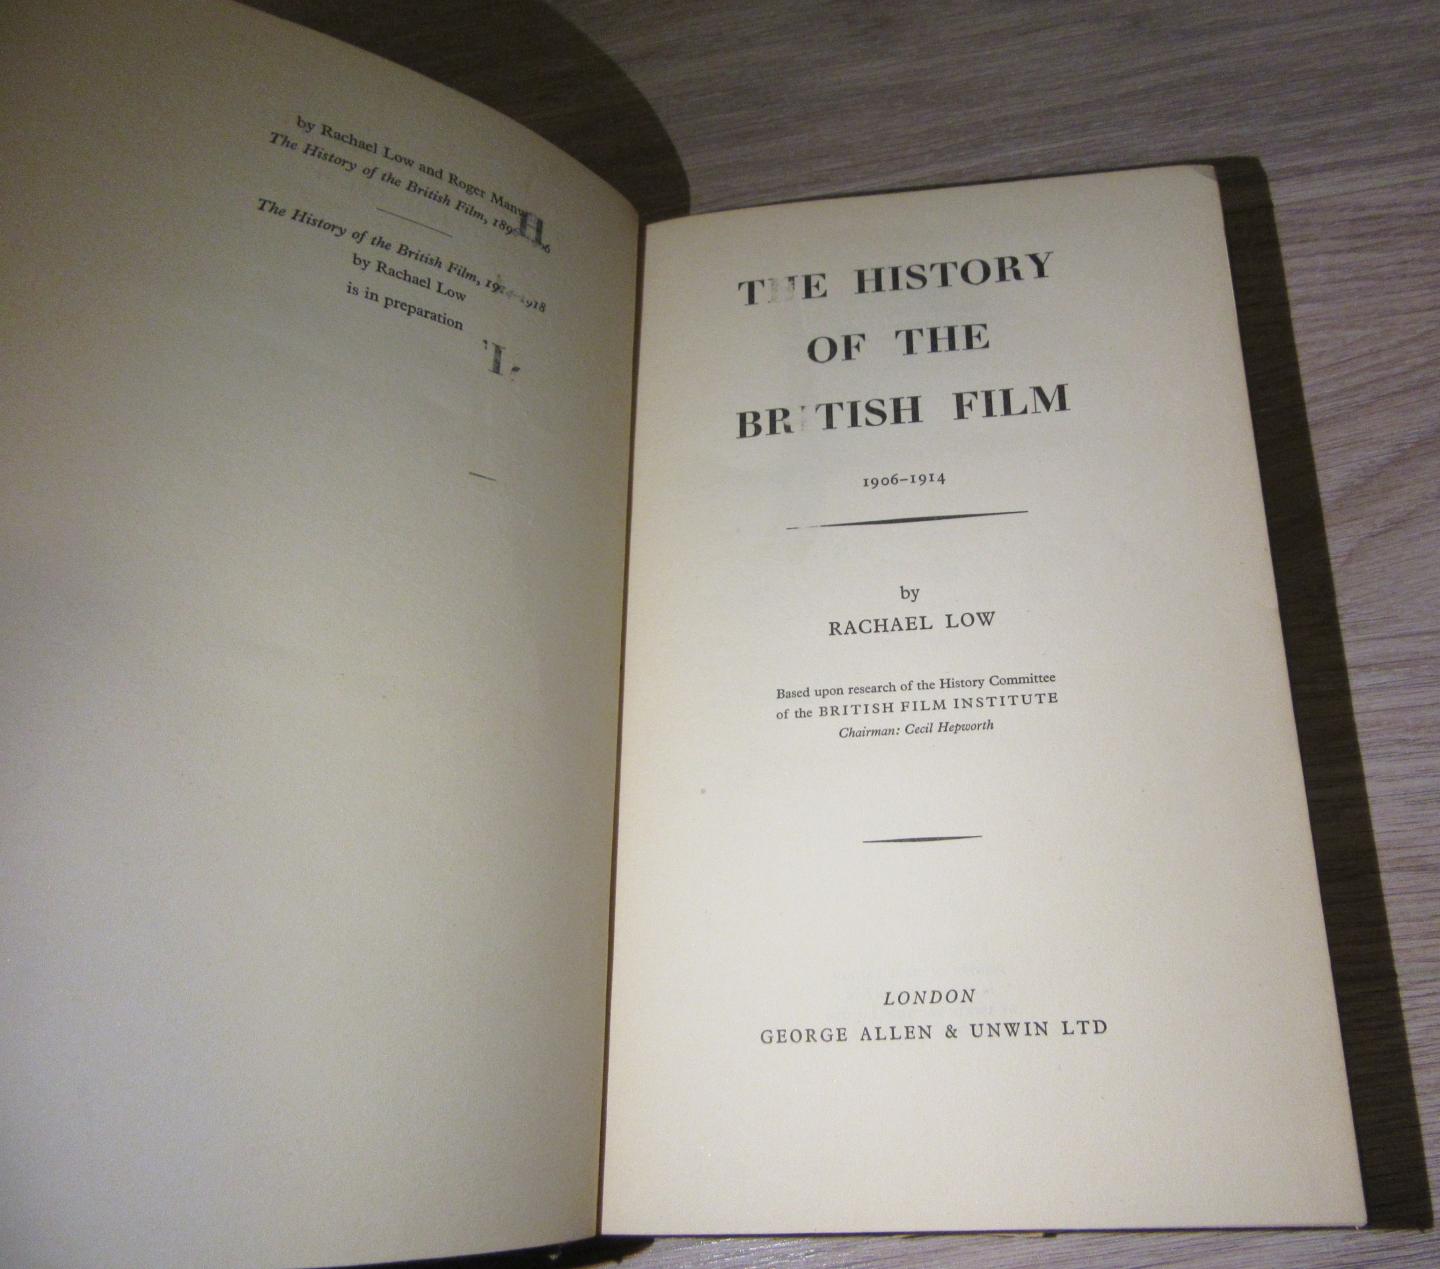 Low, Rachael - The History of the British Film 1906-1914